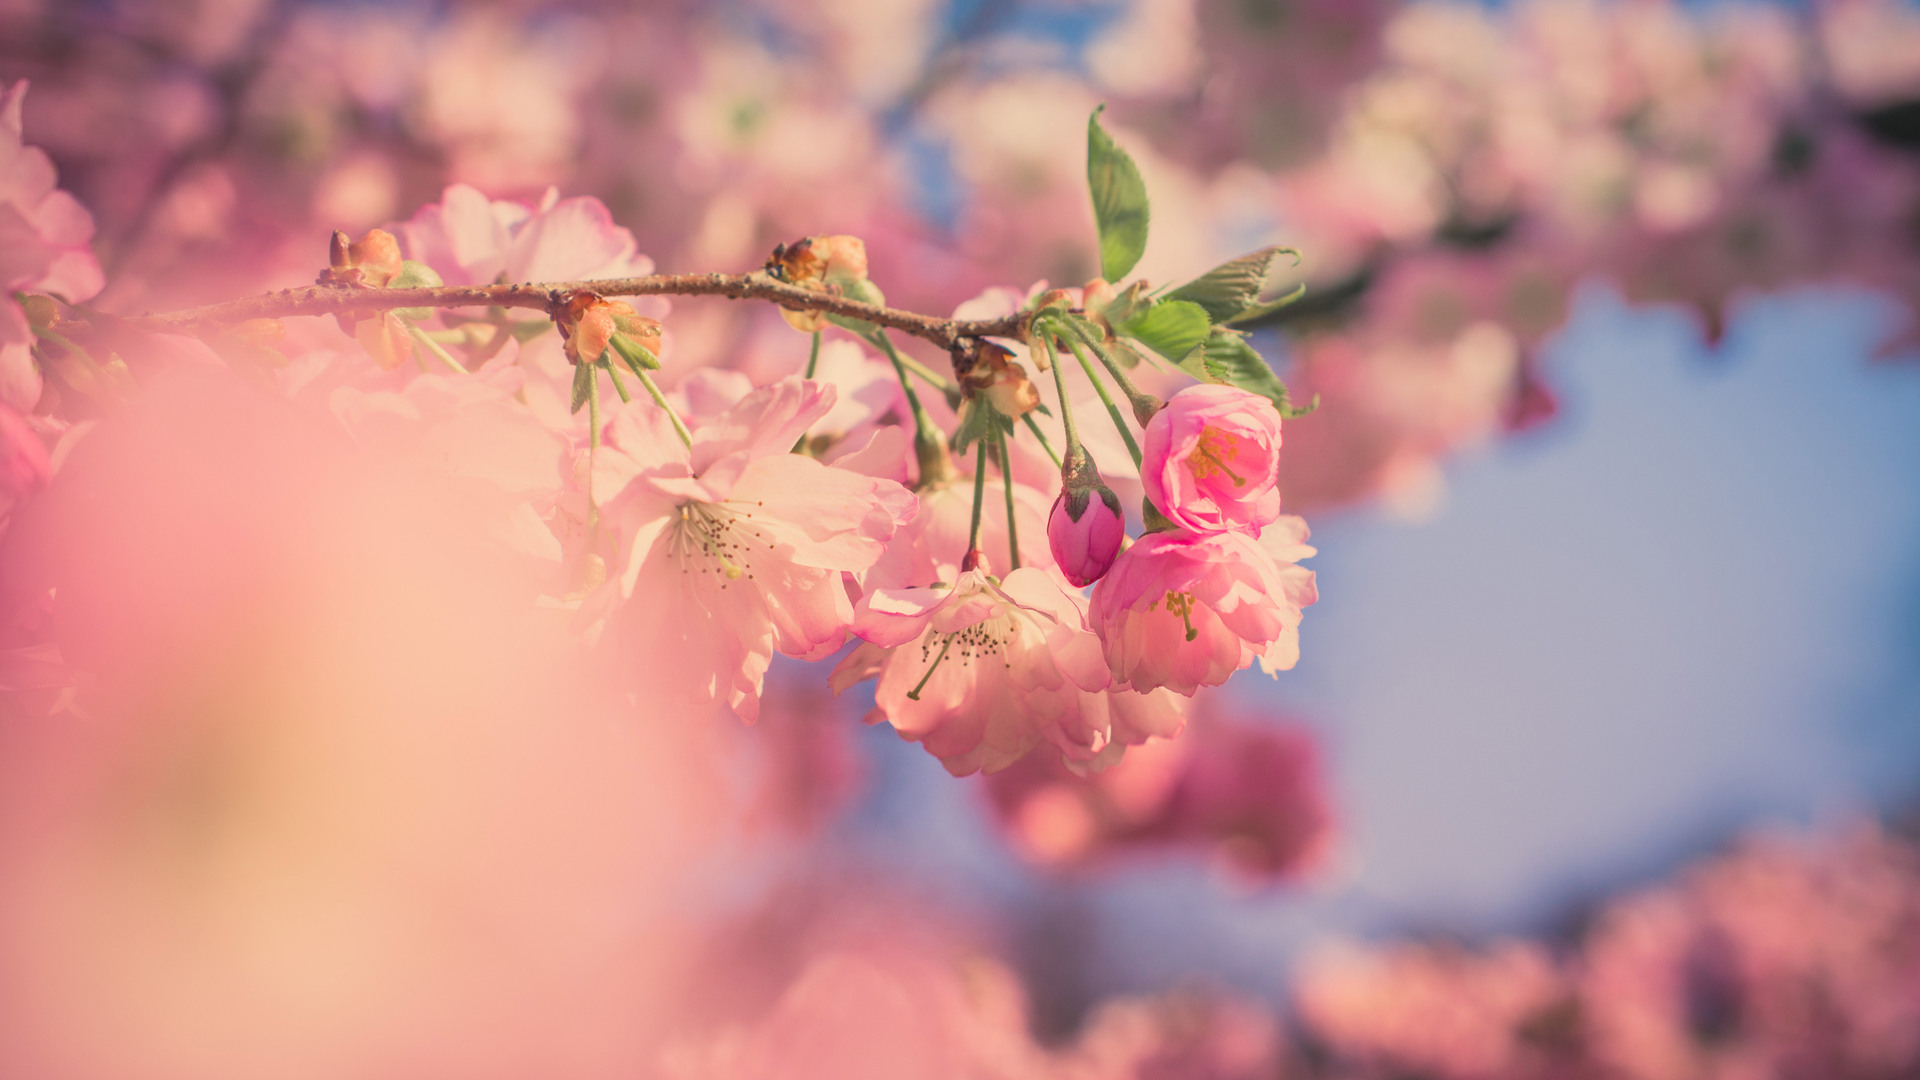 A close up of a branch of a tree with pink flowers - Flower